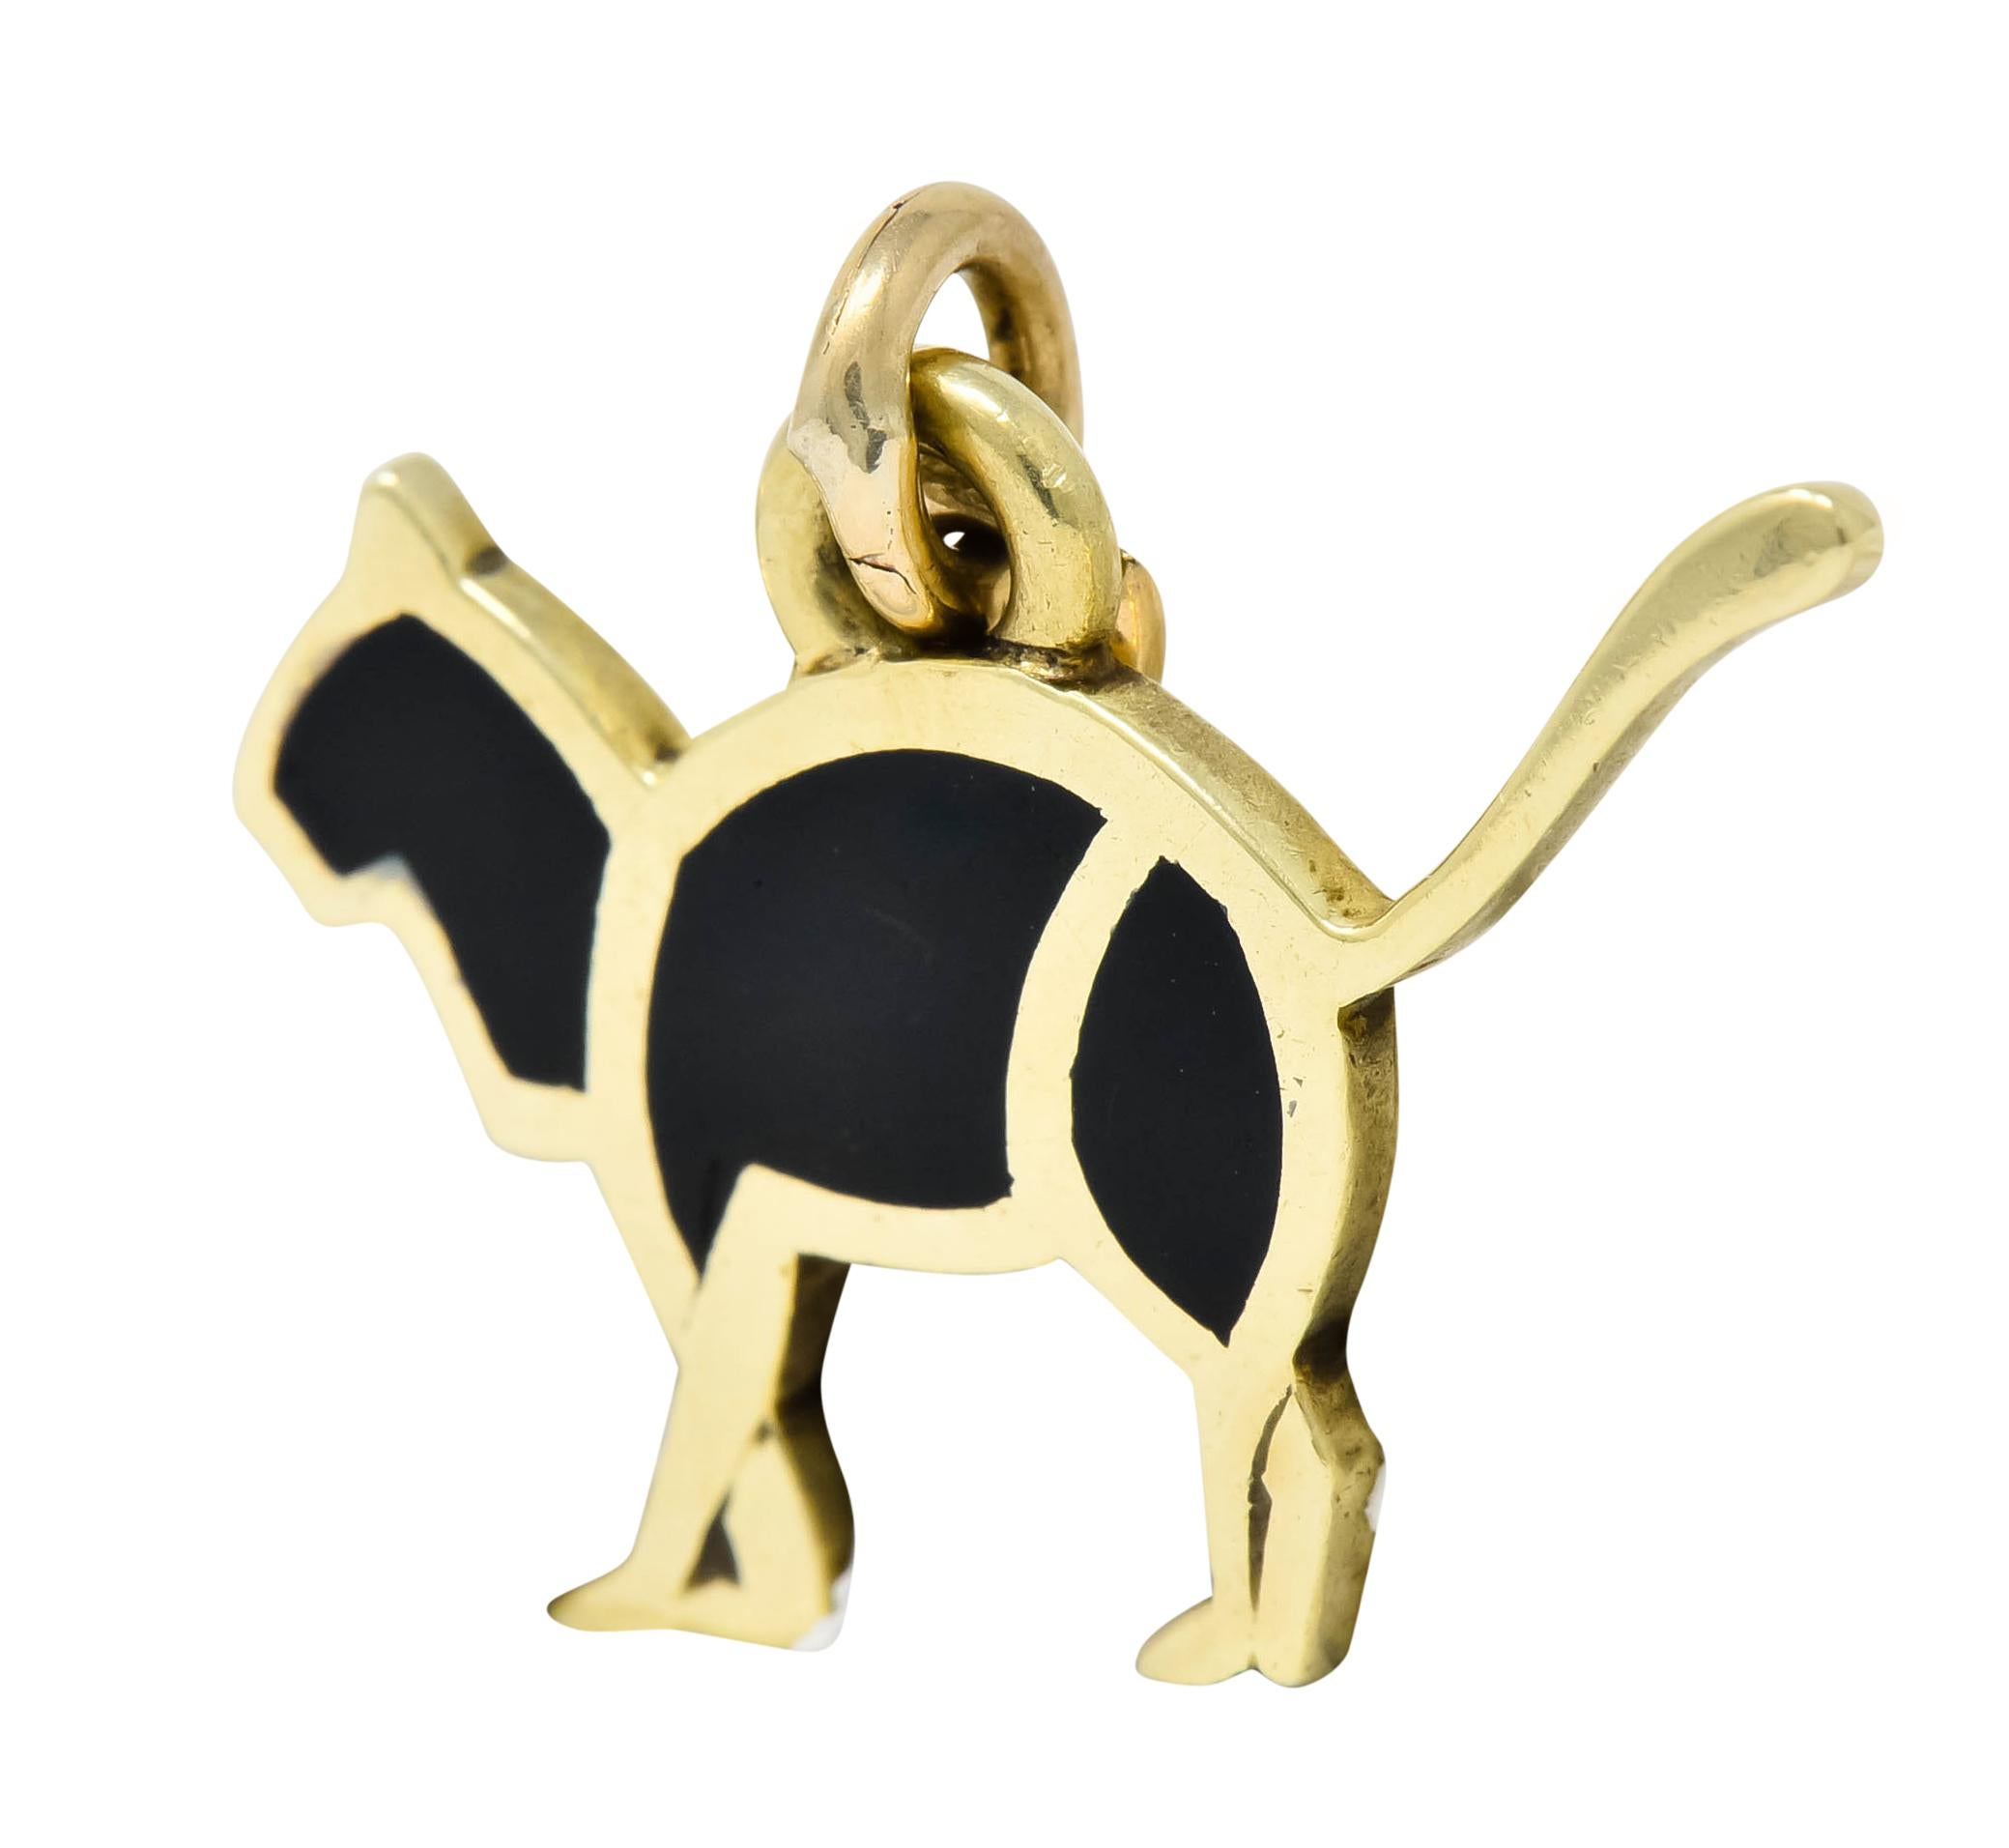 Charm designed as a stylized cat with three geometric areas of black enamel

Enamel is flat with a glossed finish and exhibits no loss; consistent with age wear and use

Completed by jump ring bale

Fully signed Cartier

Stamped 14K for 14 karat